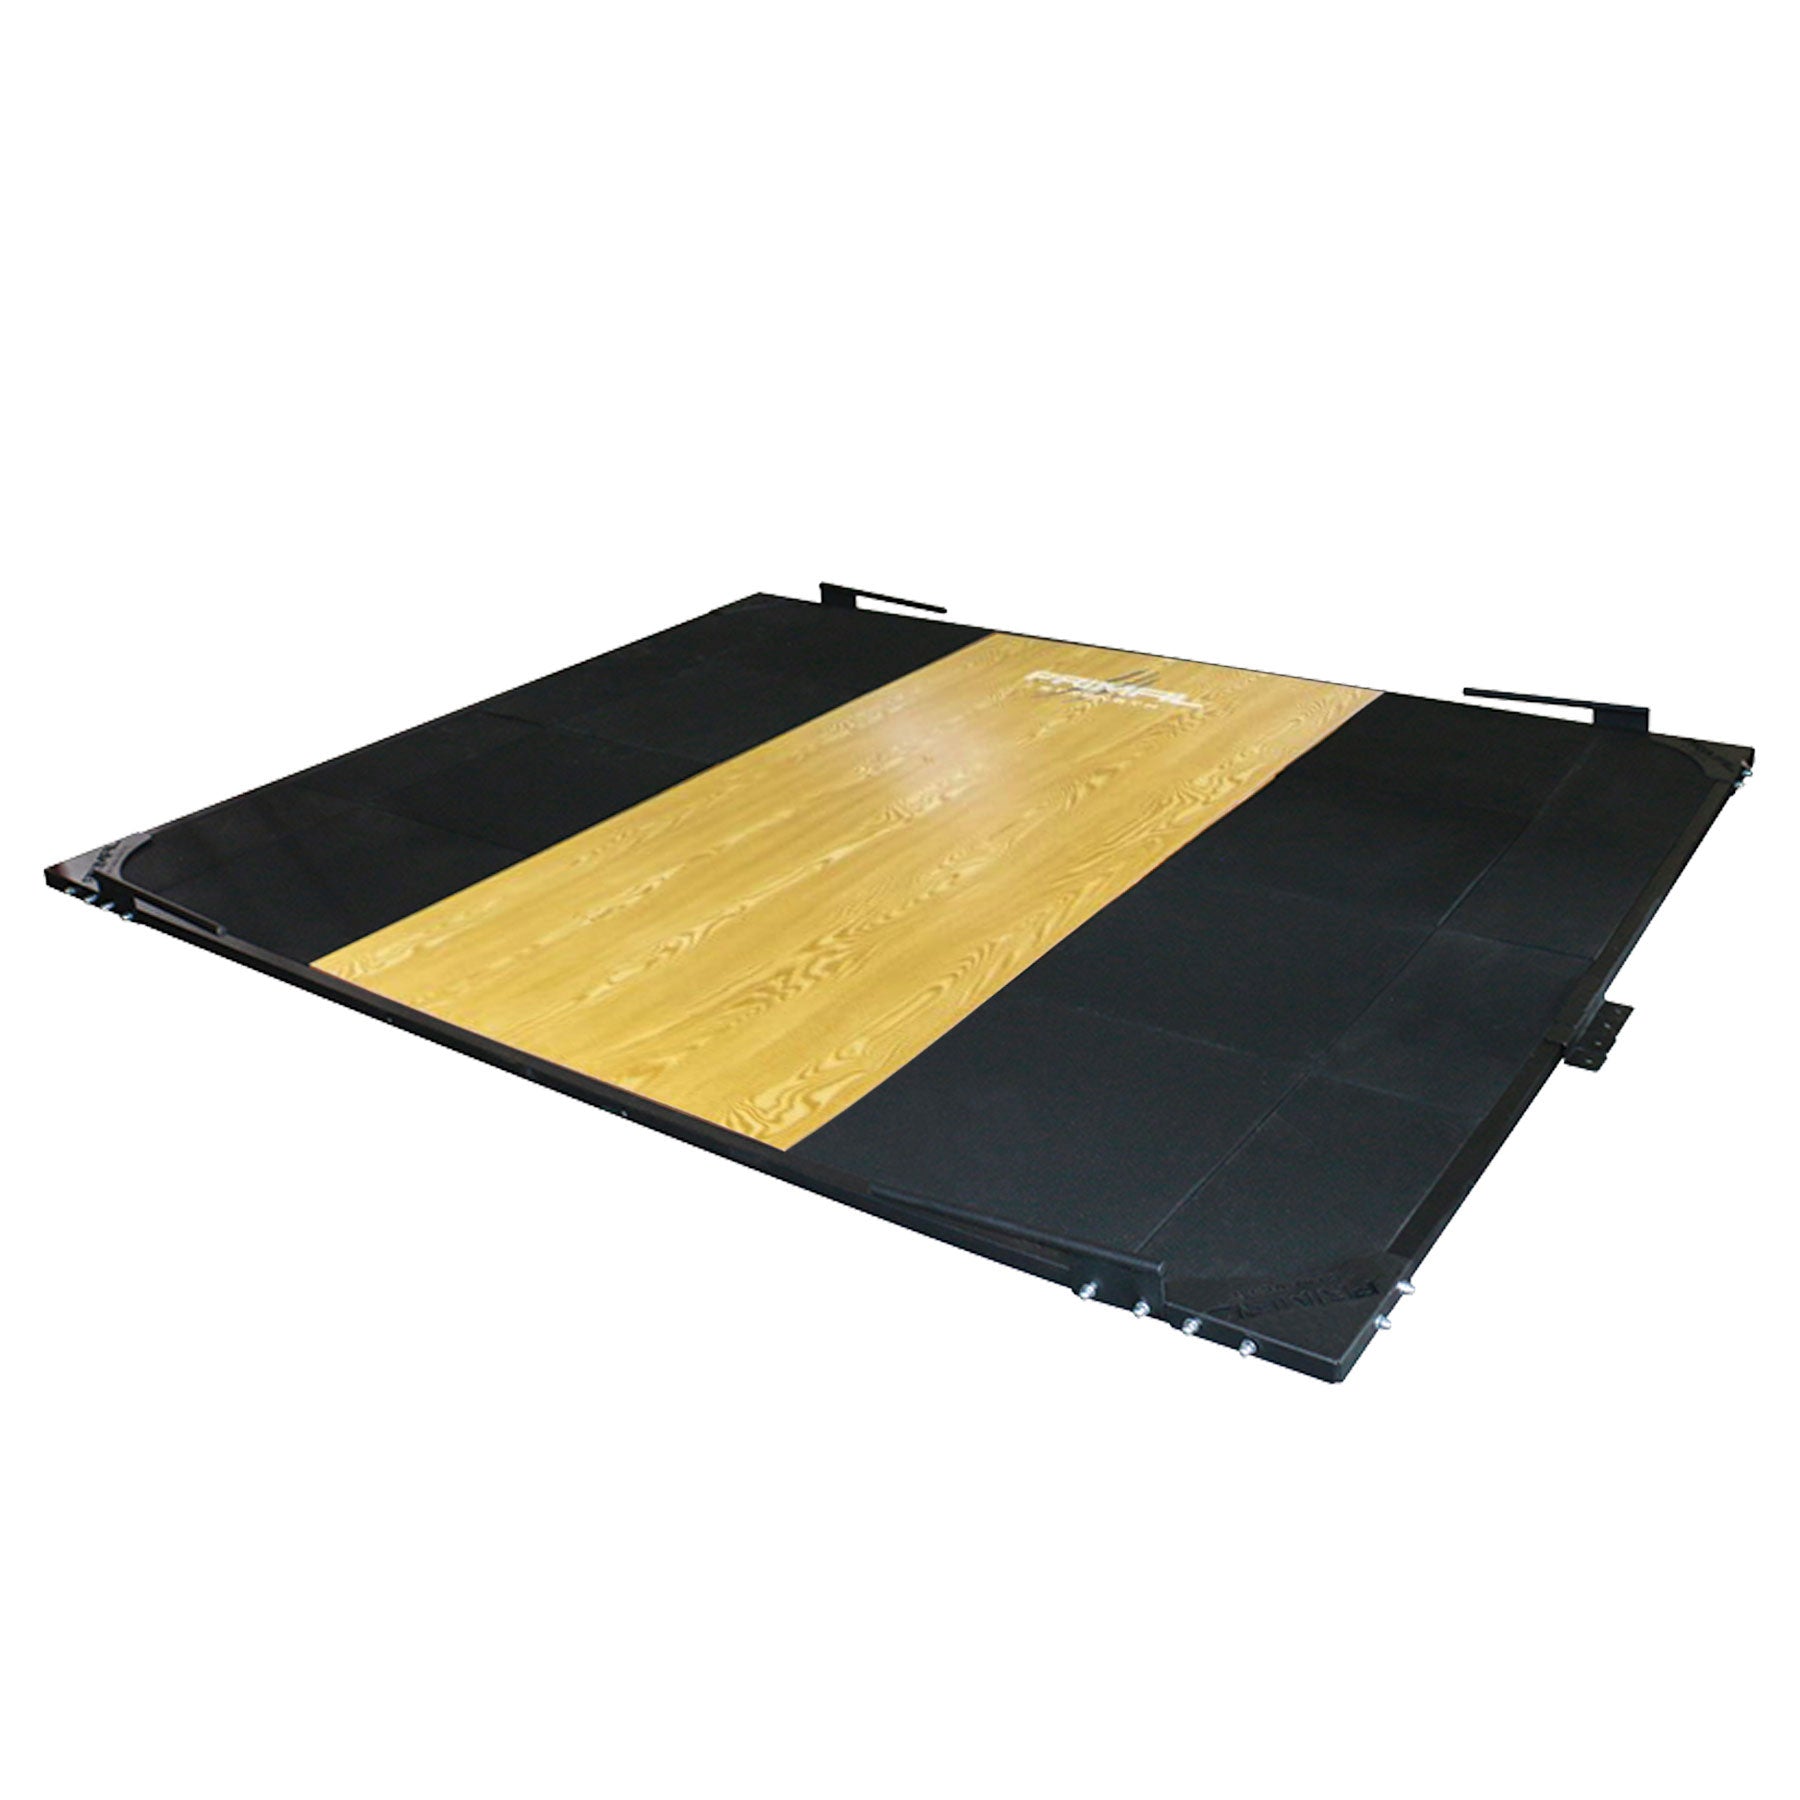 deadlift lifting platform with wooden centre and rubber base sides